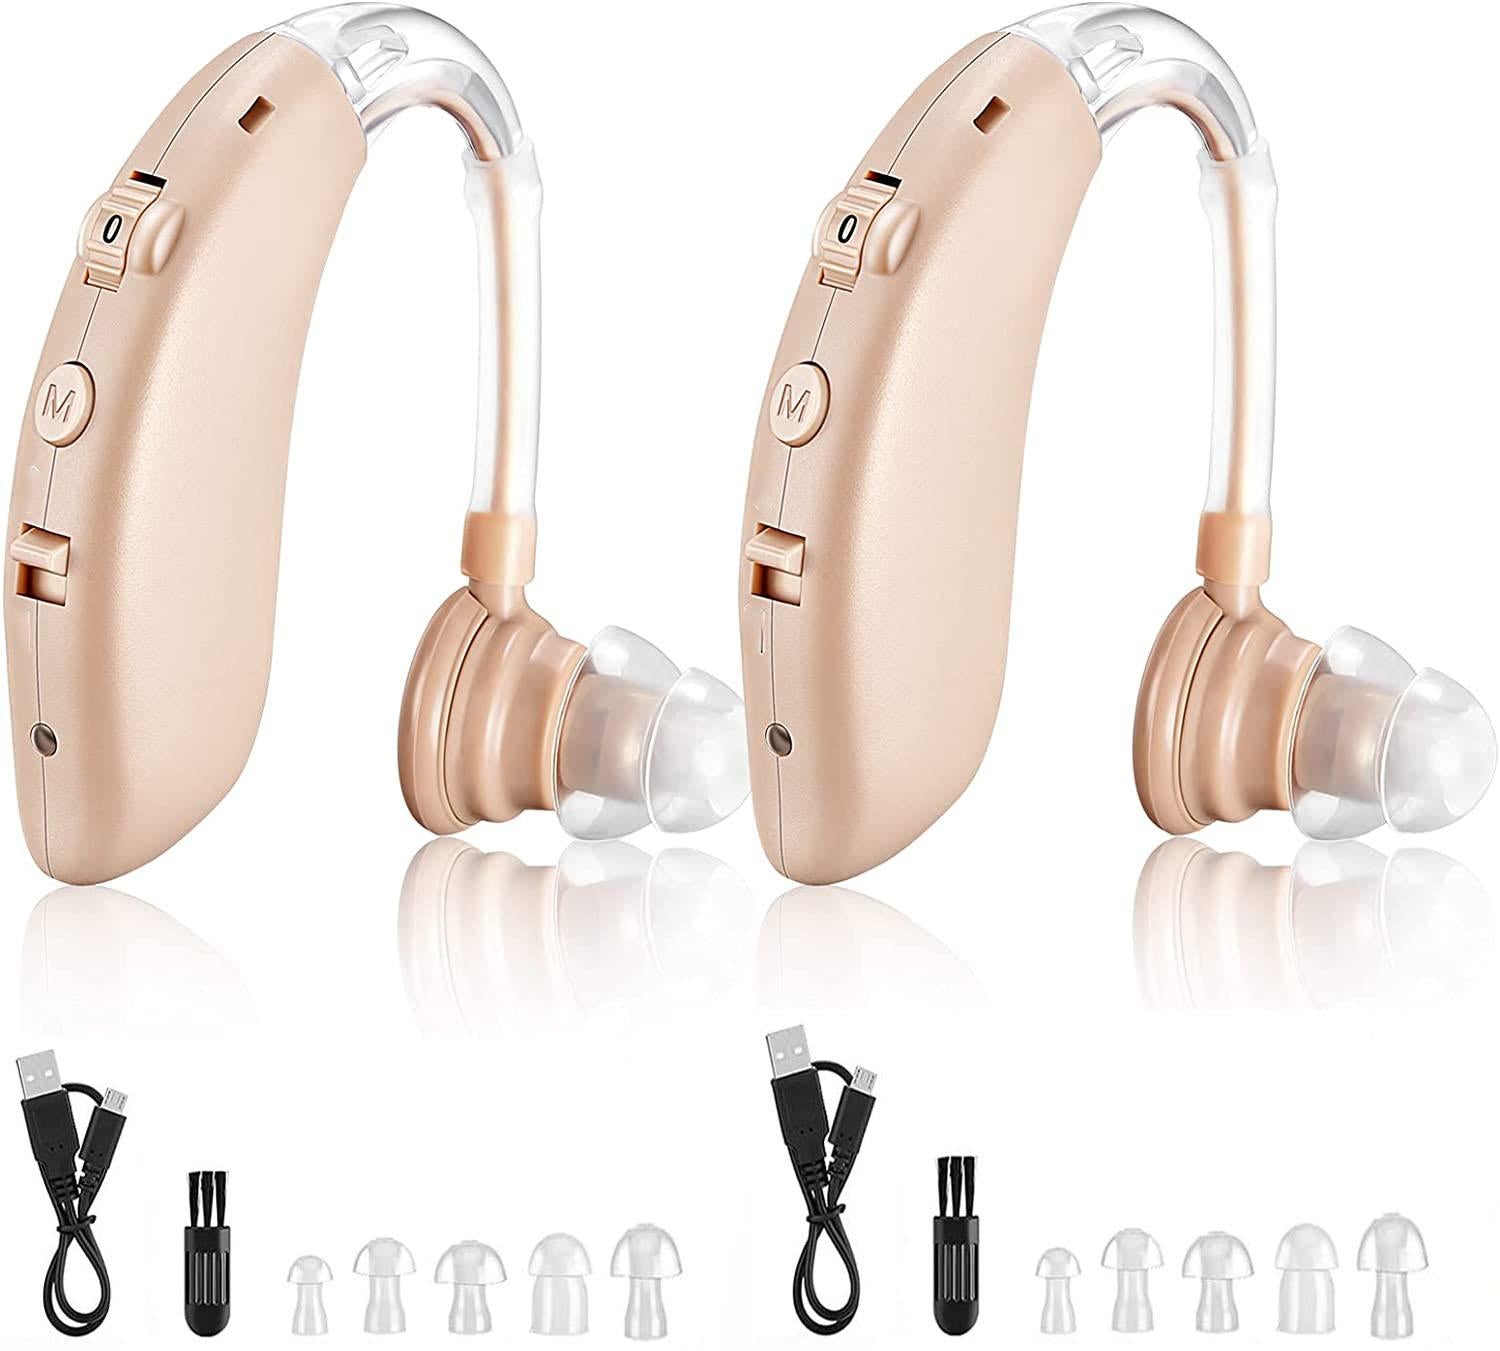 Hearing Aids for Ears, Digital Hearing Aid Amplifier, USB Rechargeable Enhances Speech and Audio Sound Amplifier, Behind-the-Ear Hearing Aids with Noise Reducing Feature, Beige, 1 Pair